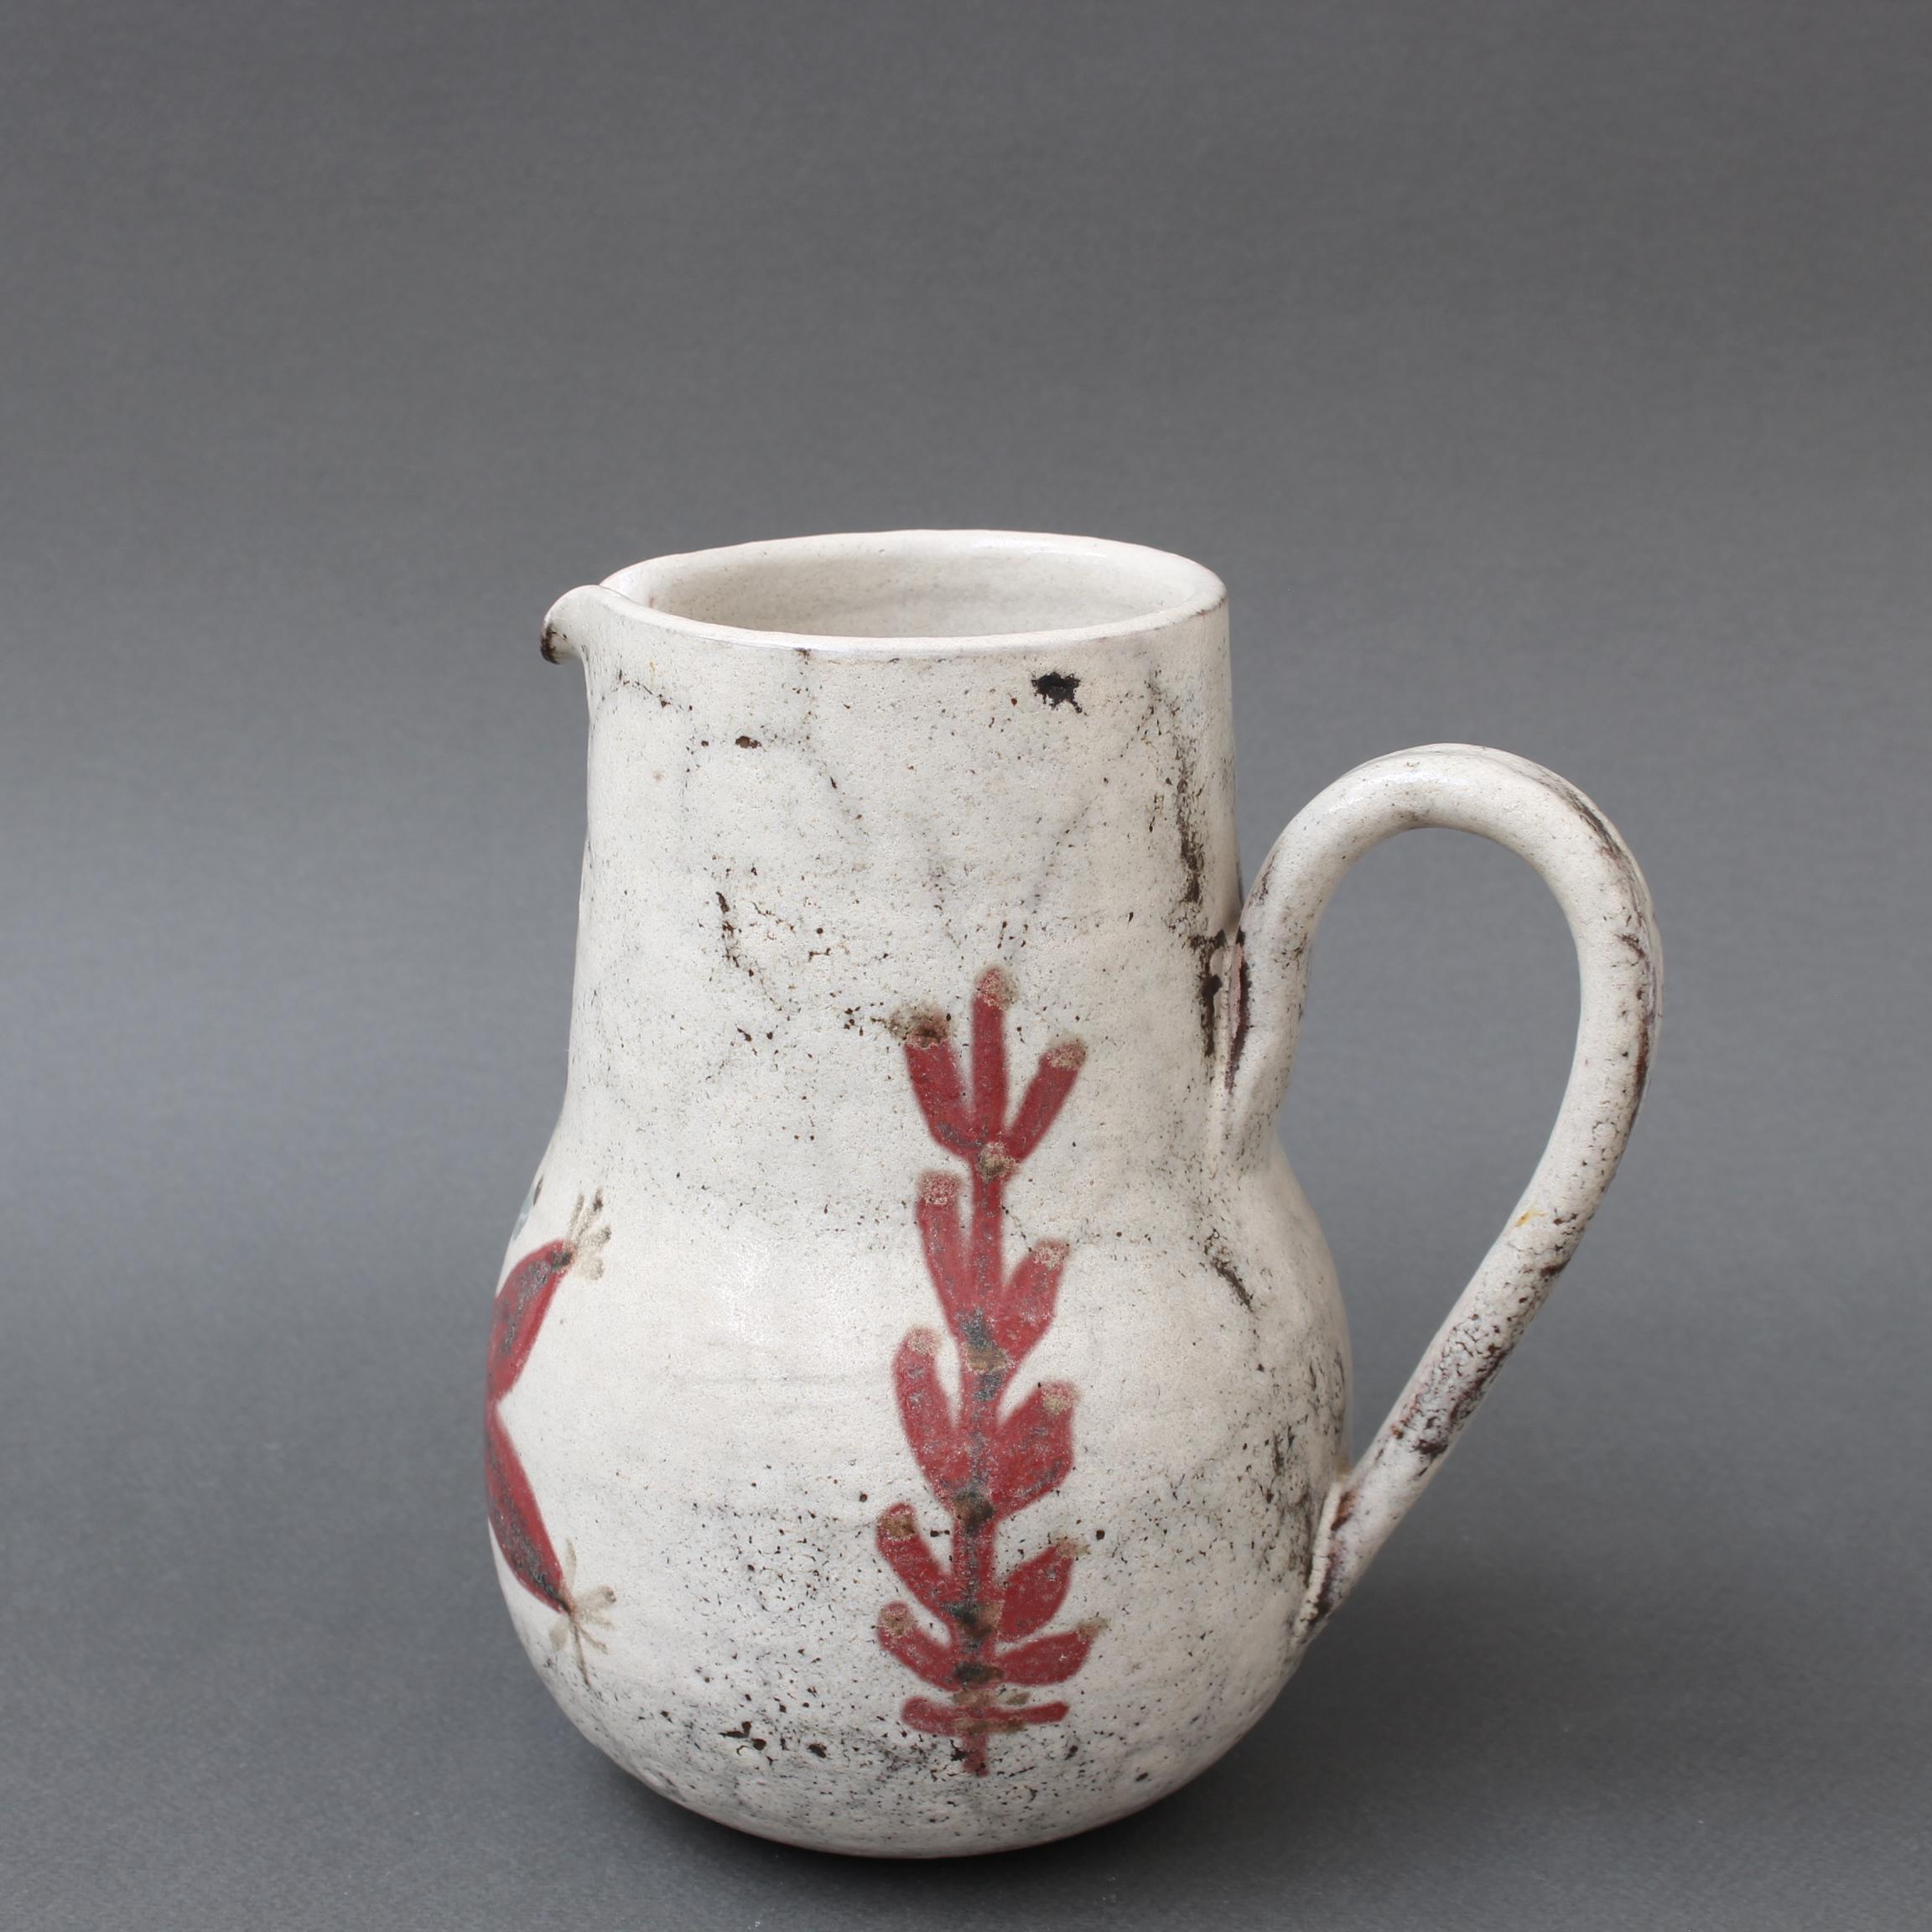 Midcentury French Ceramic Lidded Pitcher by Le Mûrier, 'circa 1960s' For Sale 3